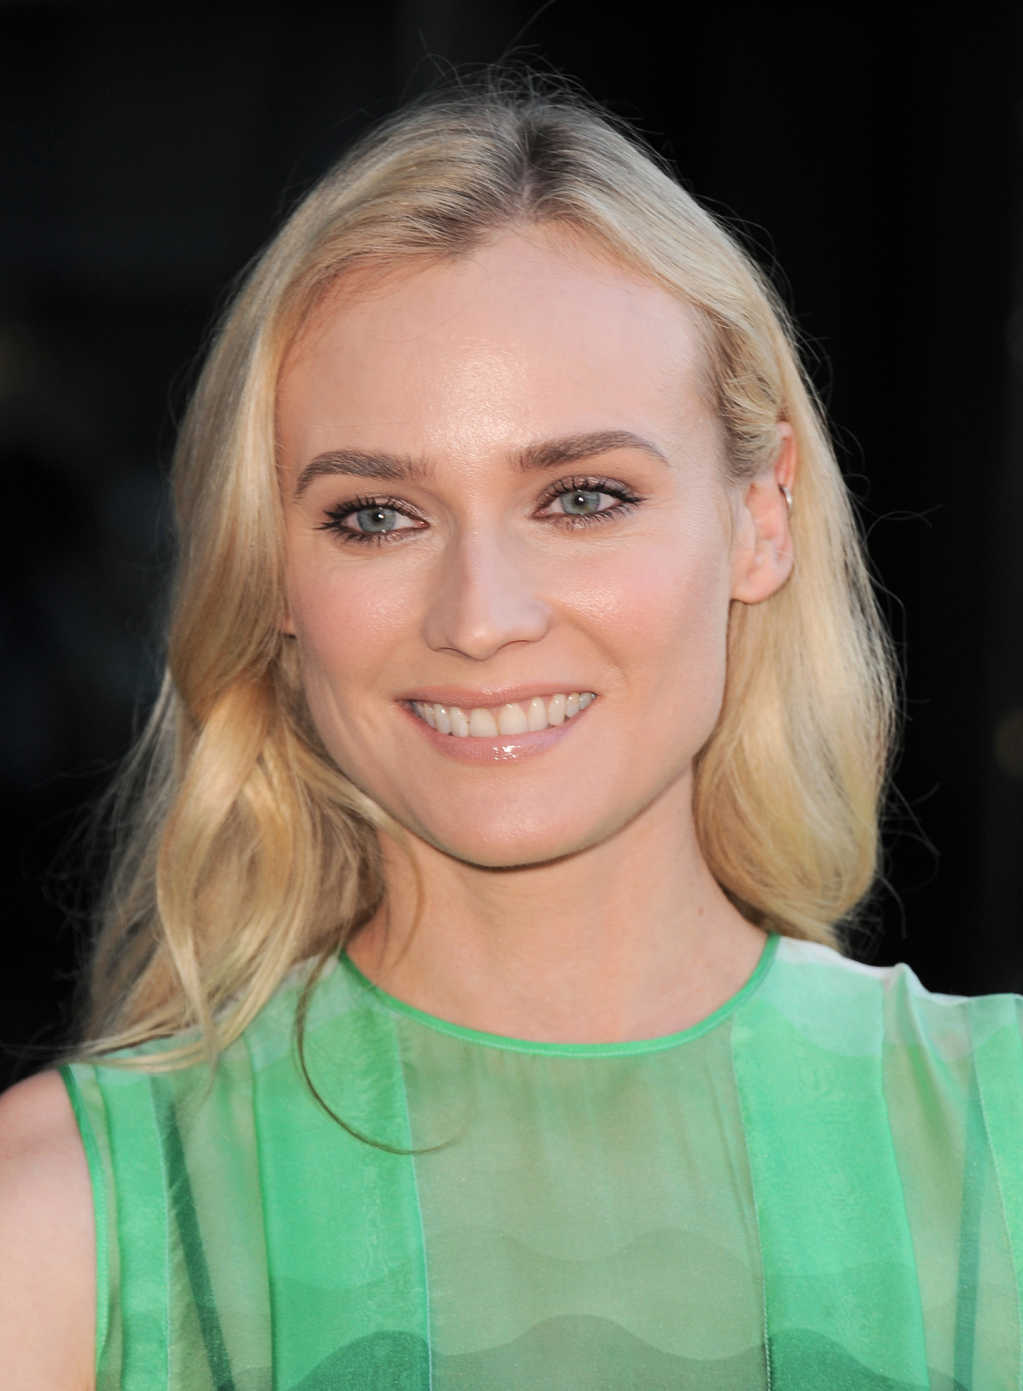 Diane Kruger photo 558 of 1762 pics, wallpaper - photo #626156 - ThePlace2